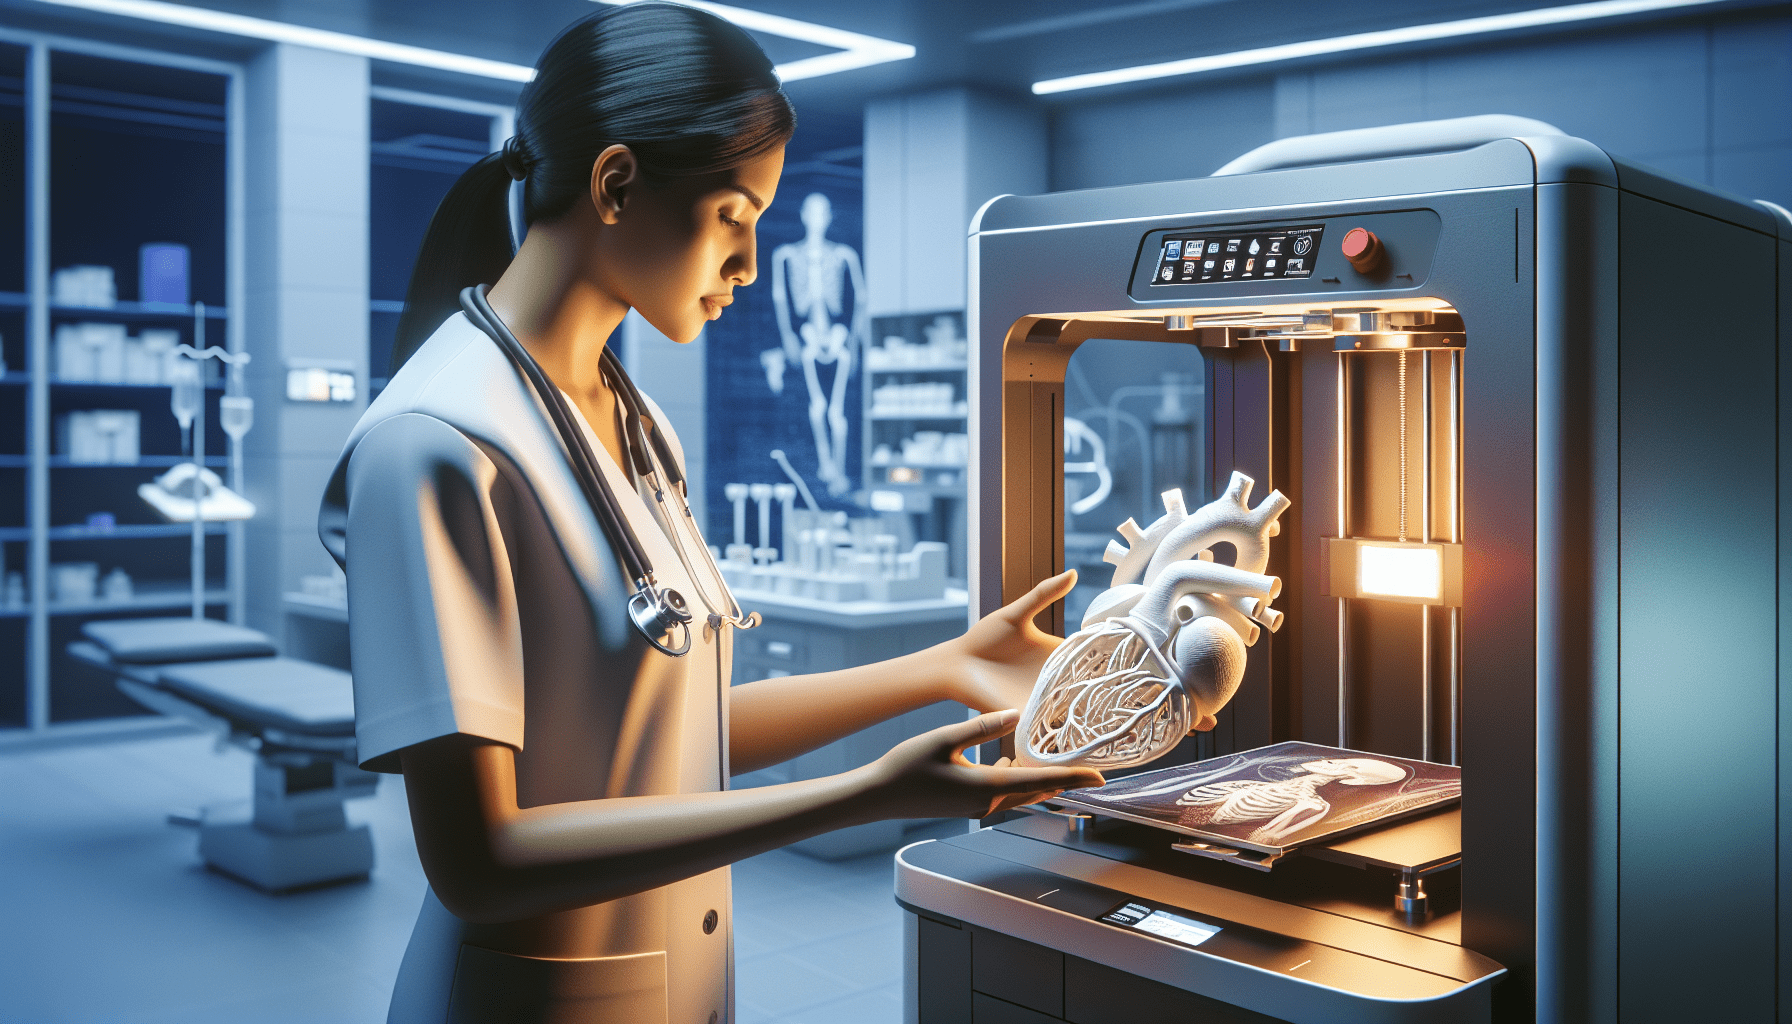 ricoh-usa-launches-healthcare-innovation-studio-for-point-of-care-additive-manufacturing Ricoh USA Launches Healthcare Innovation Studio for Point-of-Care Additive Manufacturing